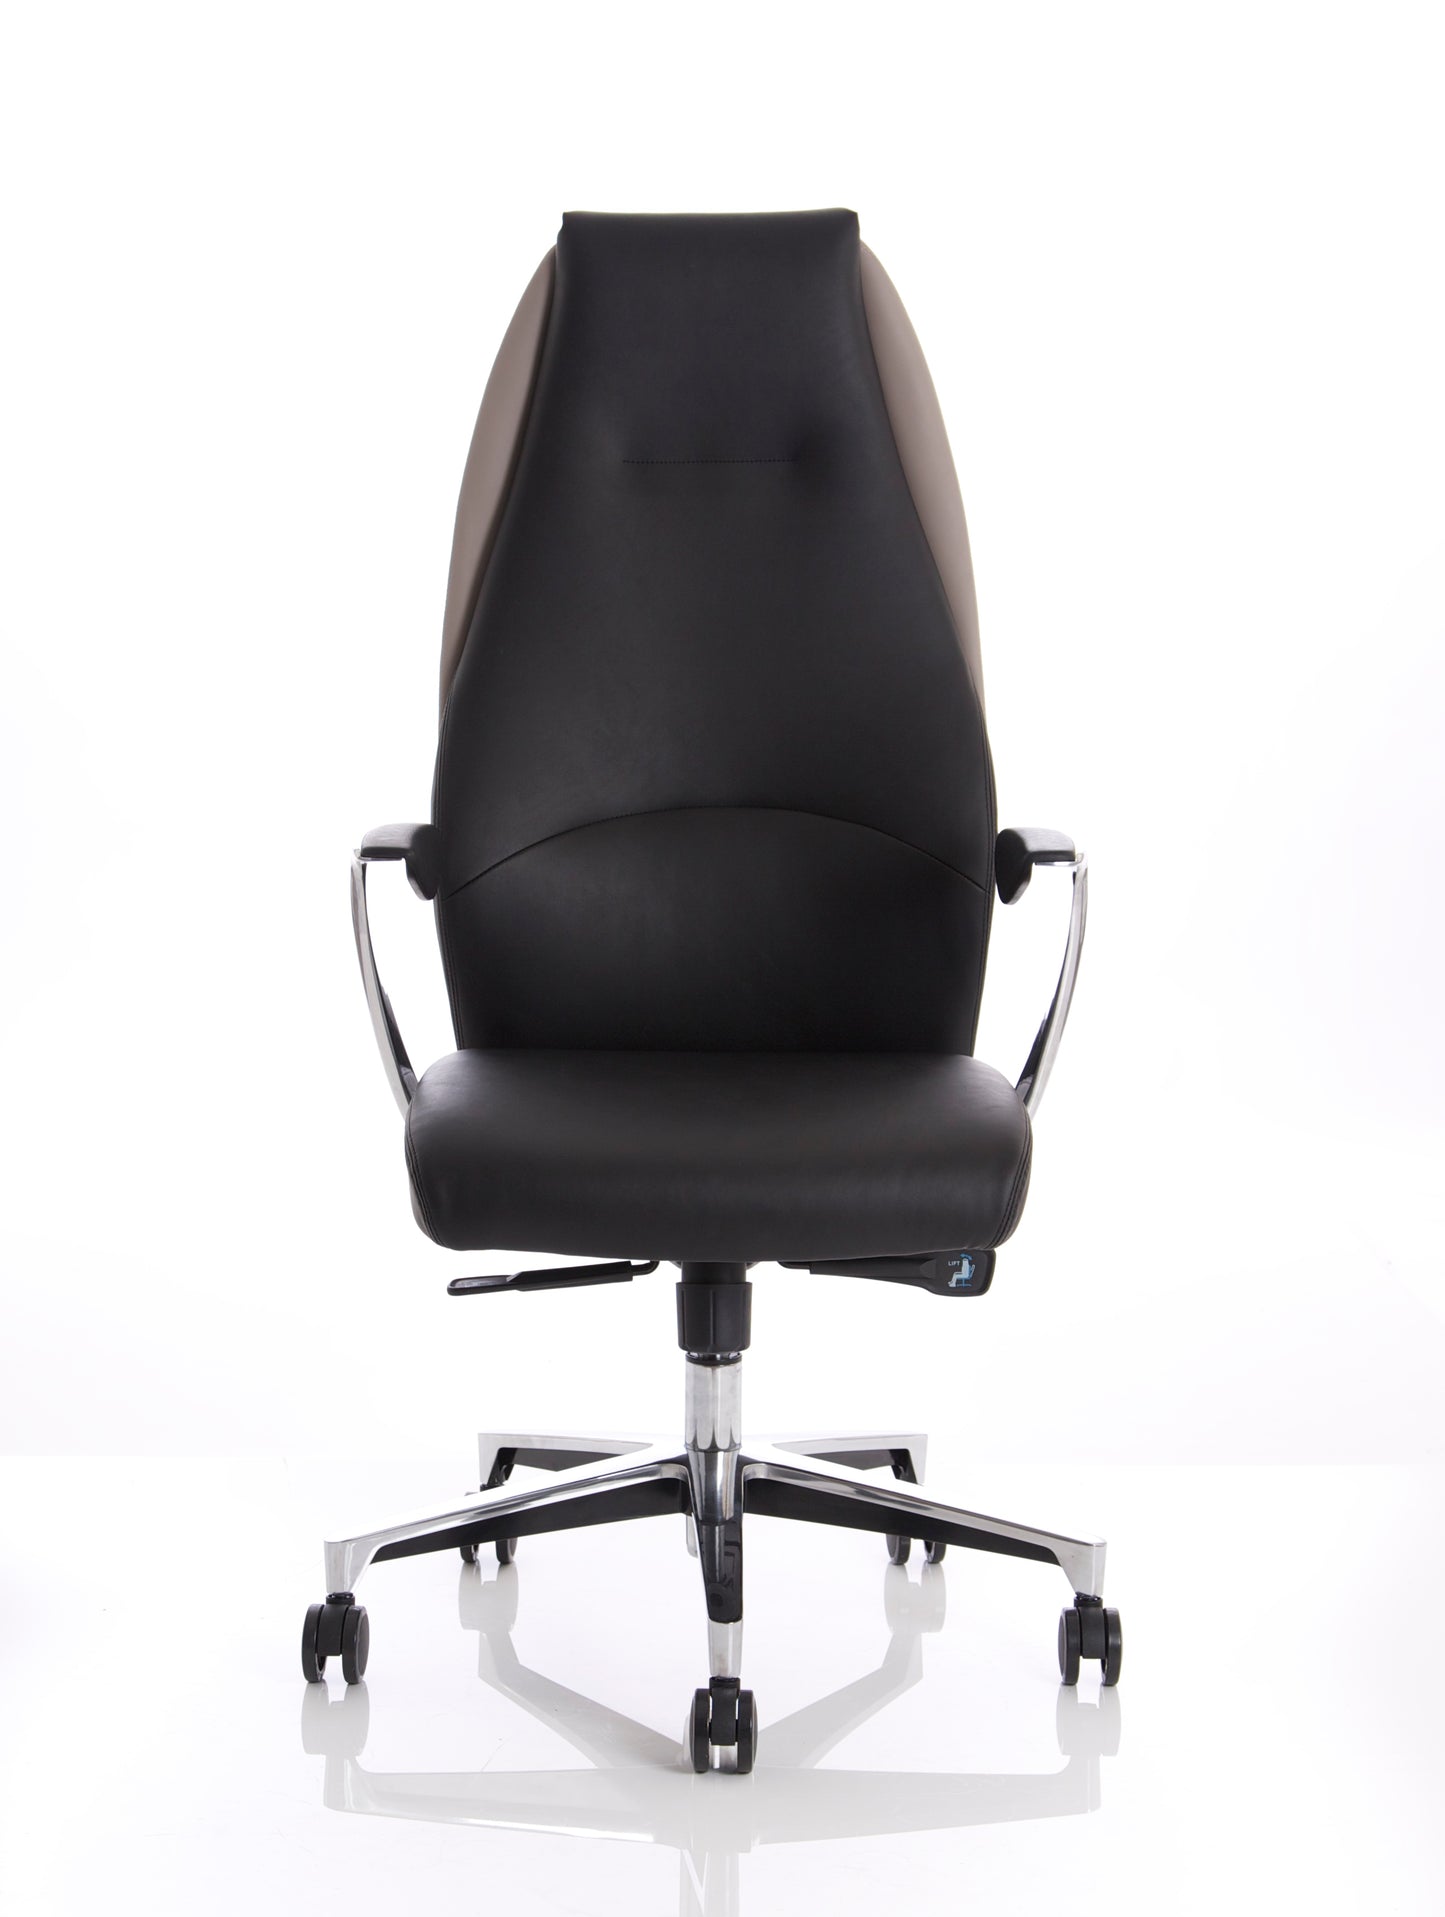 Mien Black and Mink Executive Chair EX000183